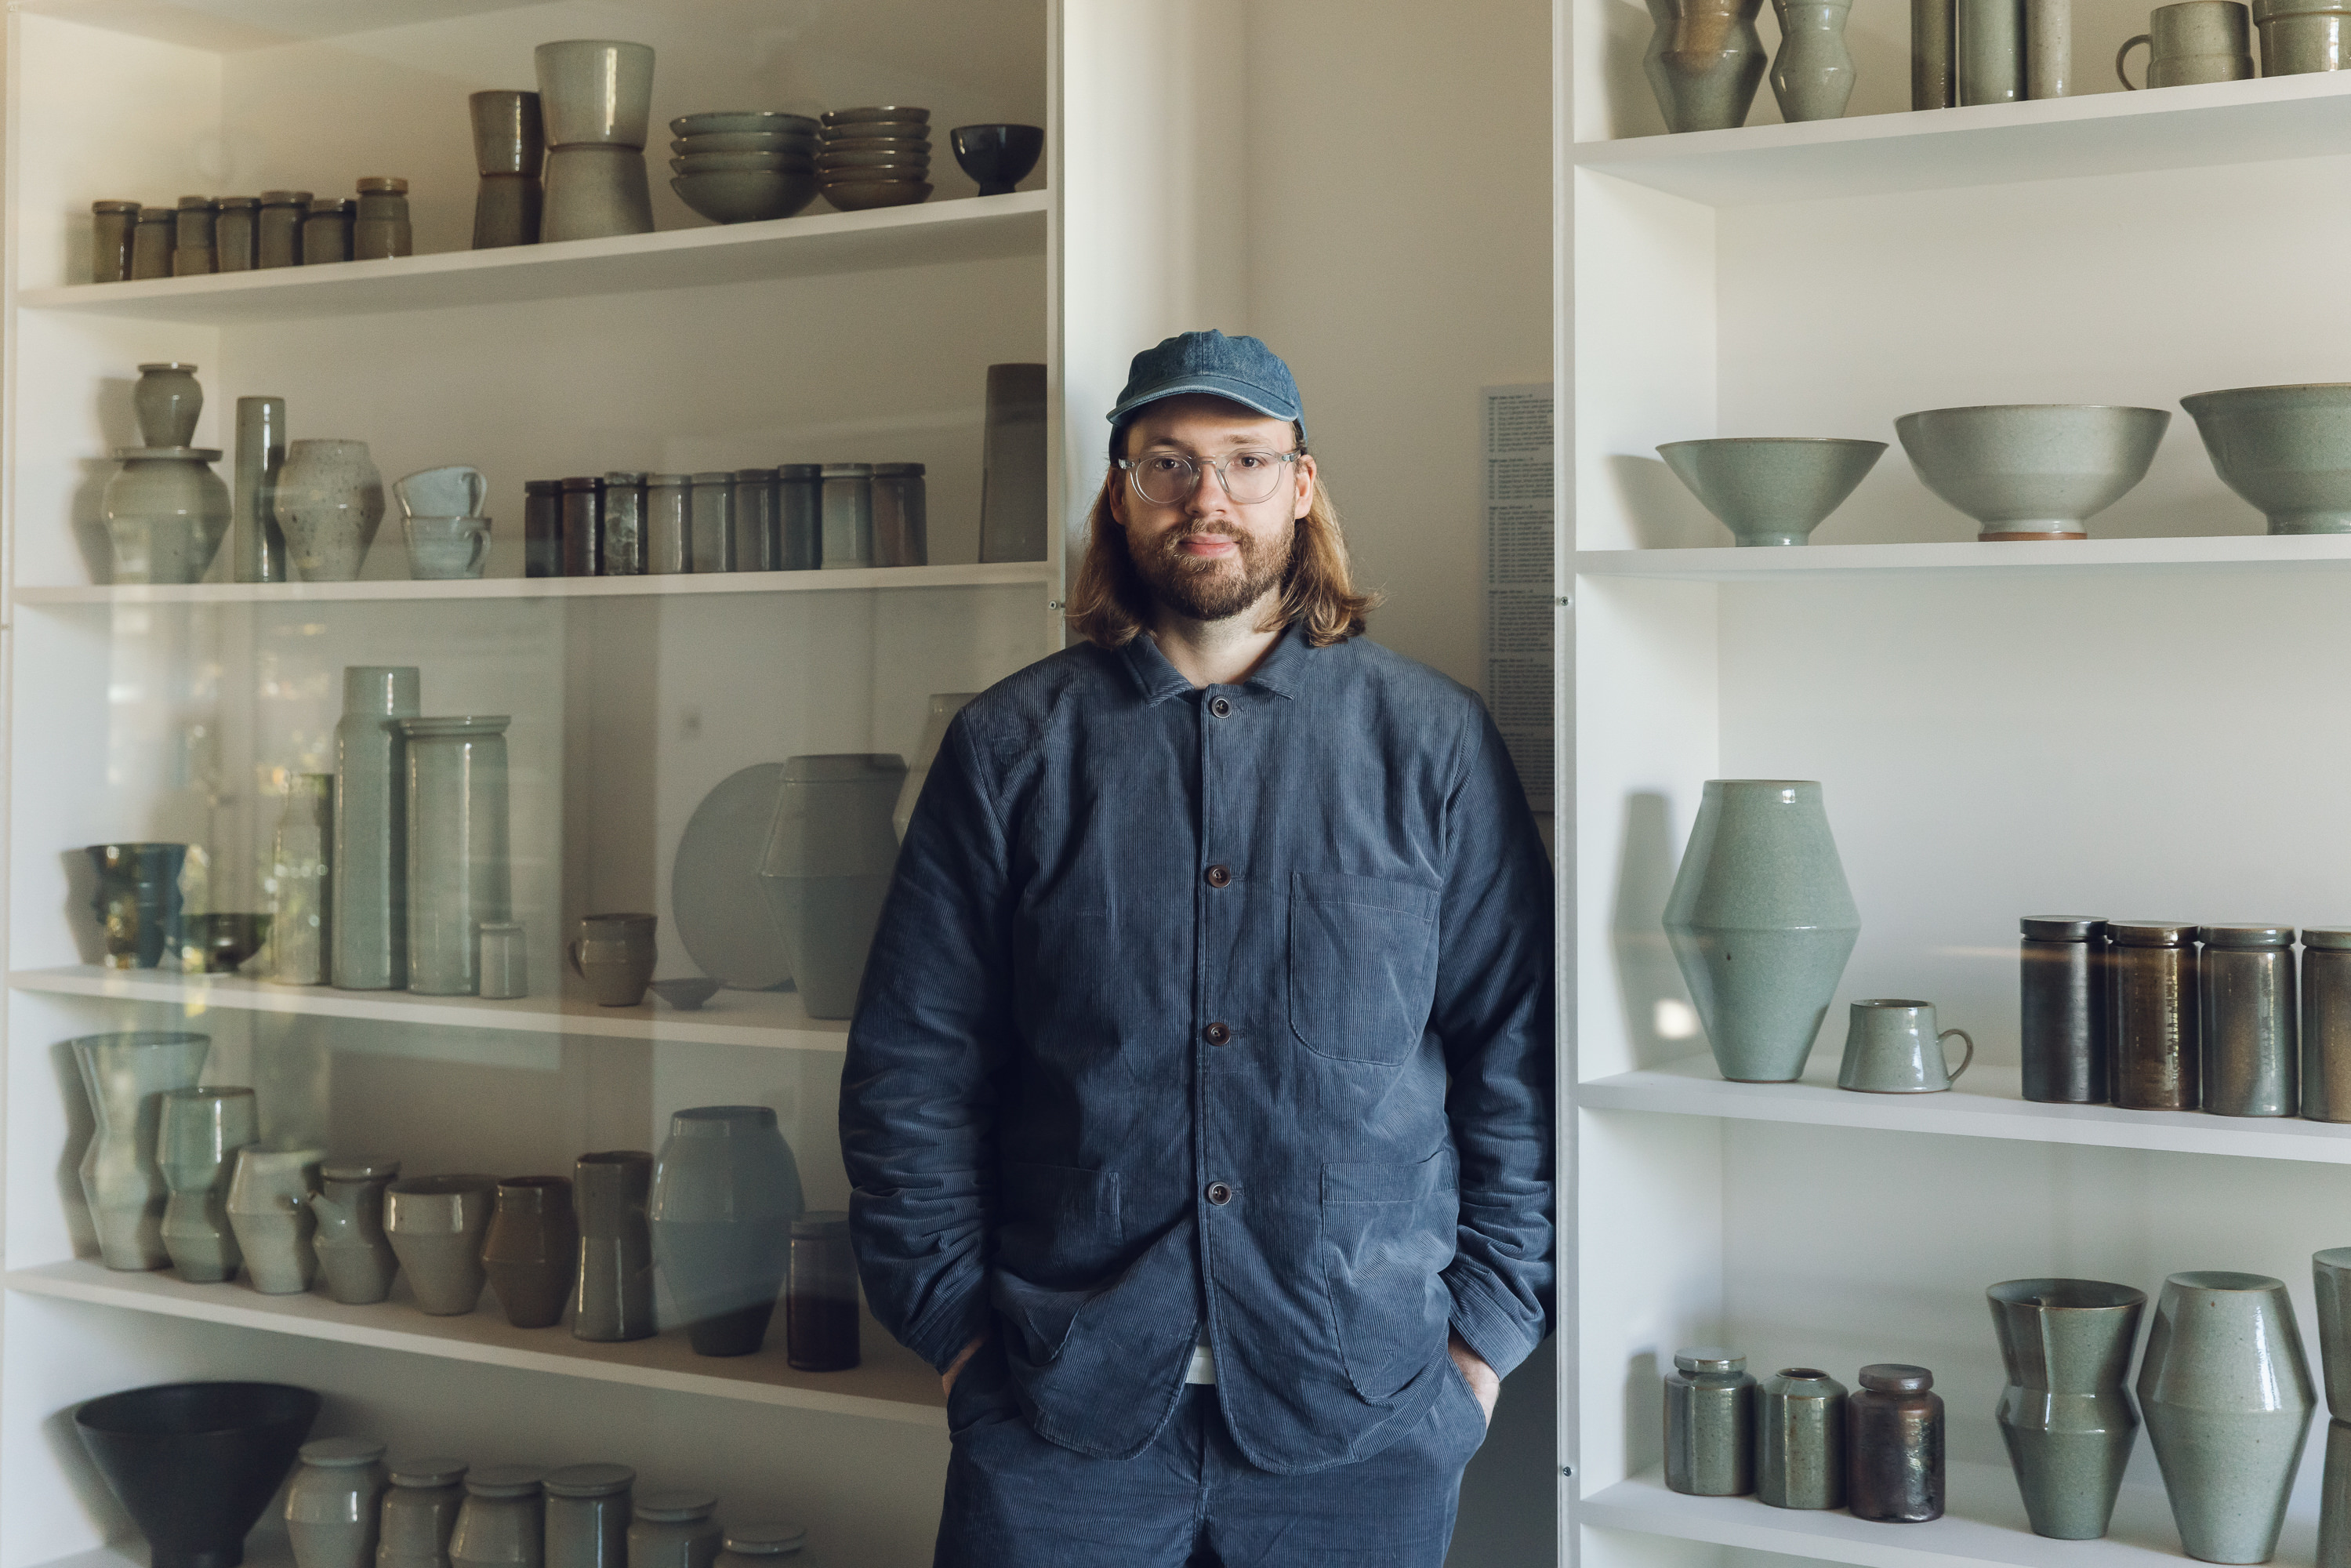 Man with shoulder length hair wearing glasses and a cap standing in front of shelves packed with ceramic vessels